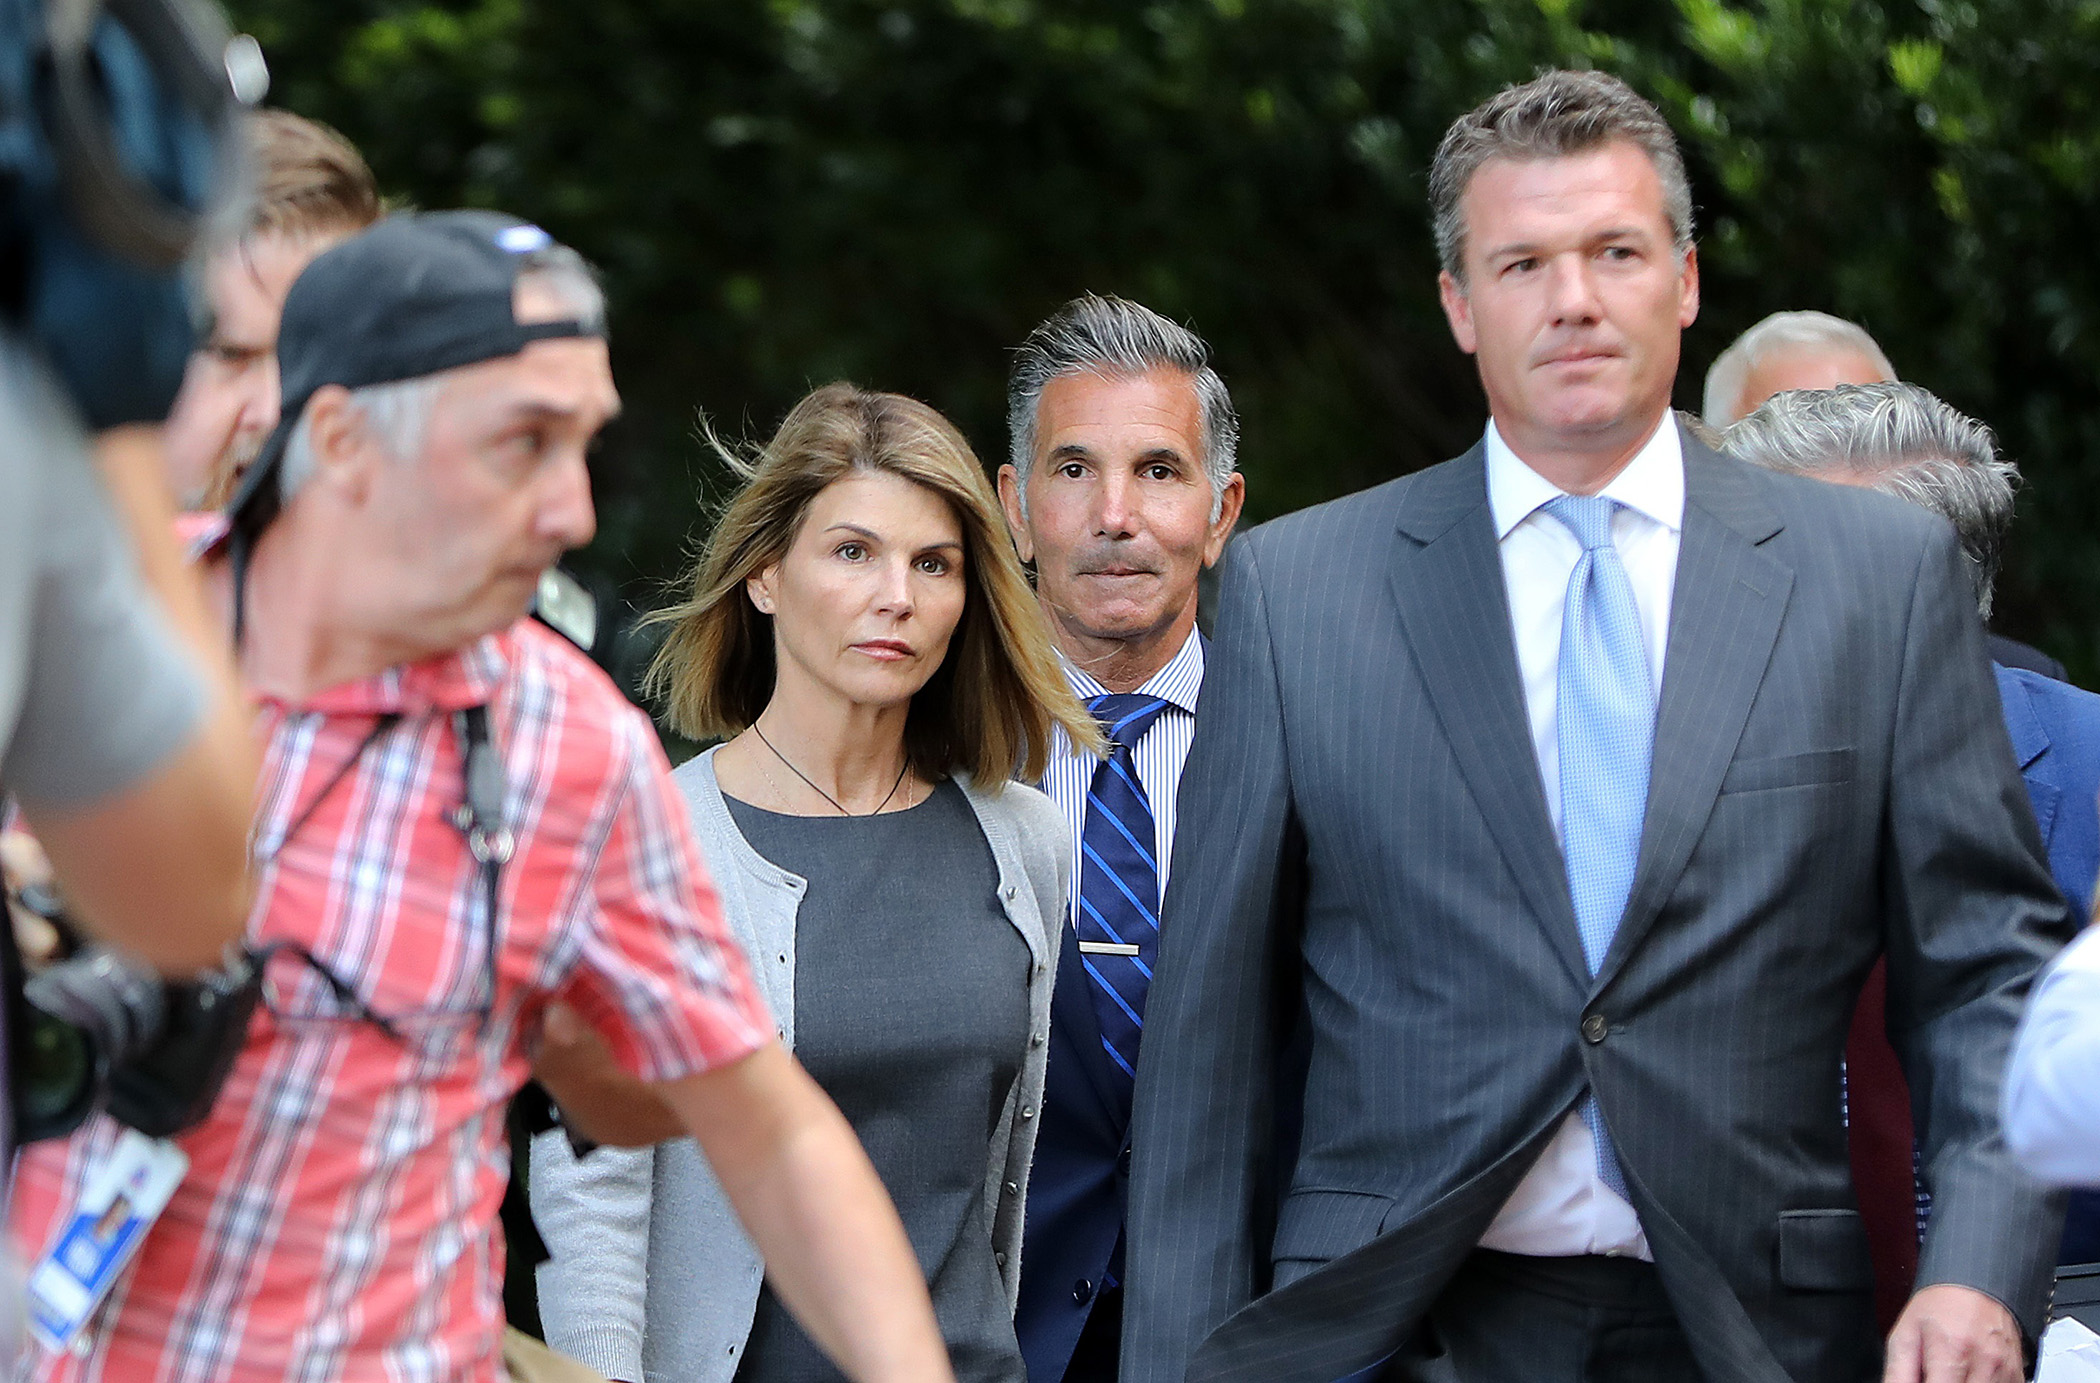 PHOTO: Lori Loughlin and her husband Mossimo Giannulli leave the courthouse in Boston on Aug. 27, 2019.